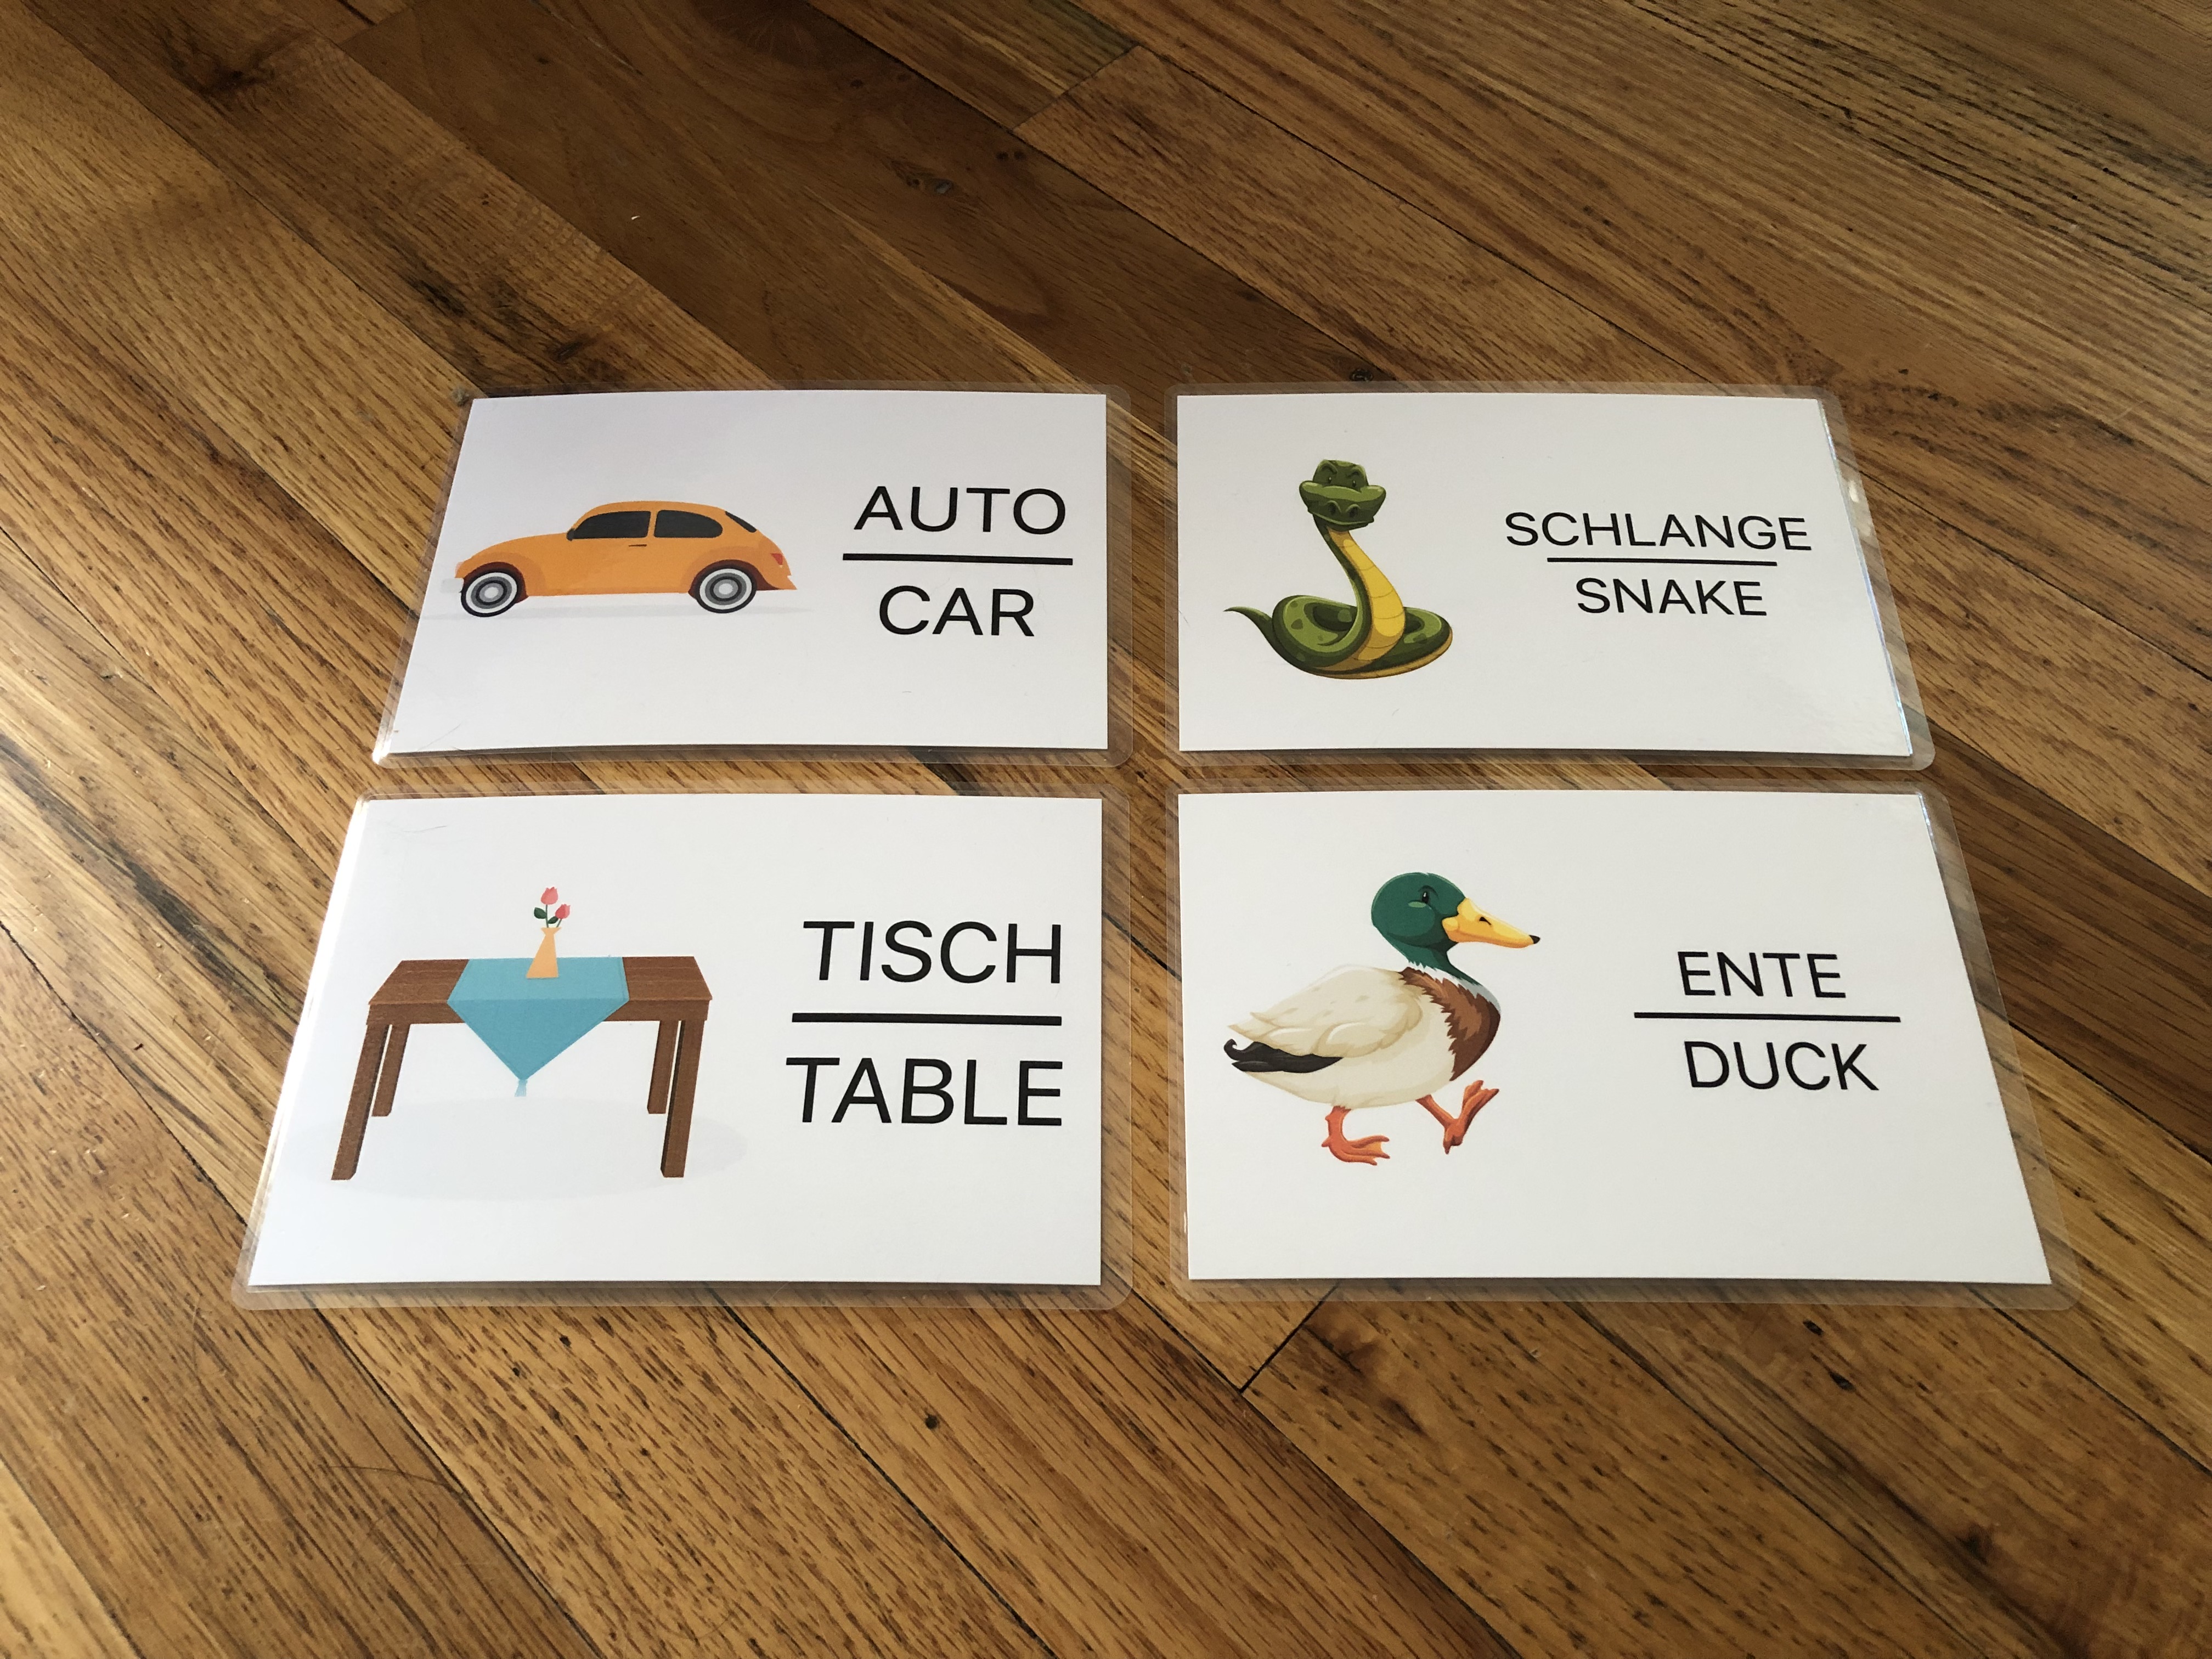 Photograph of four cards, showing symbols with their German and English translations.